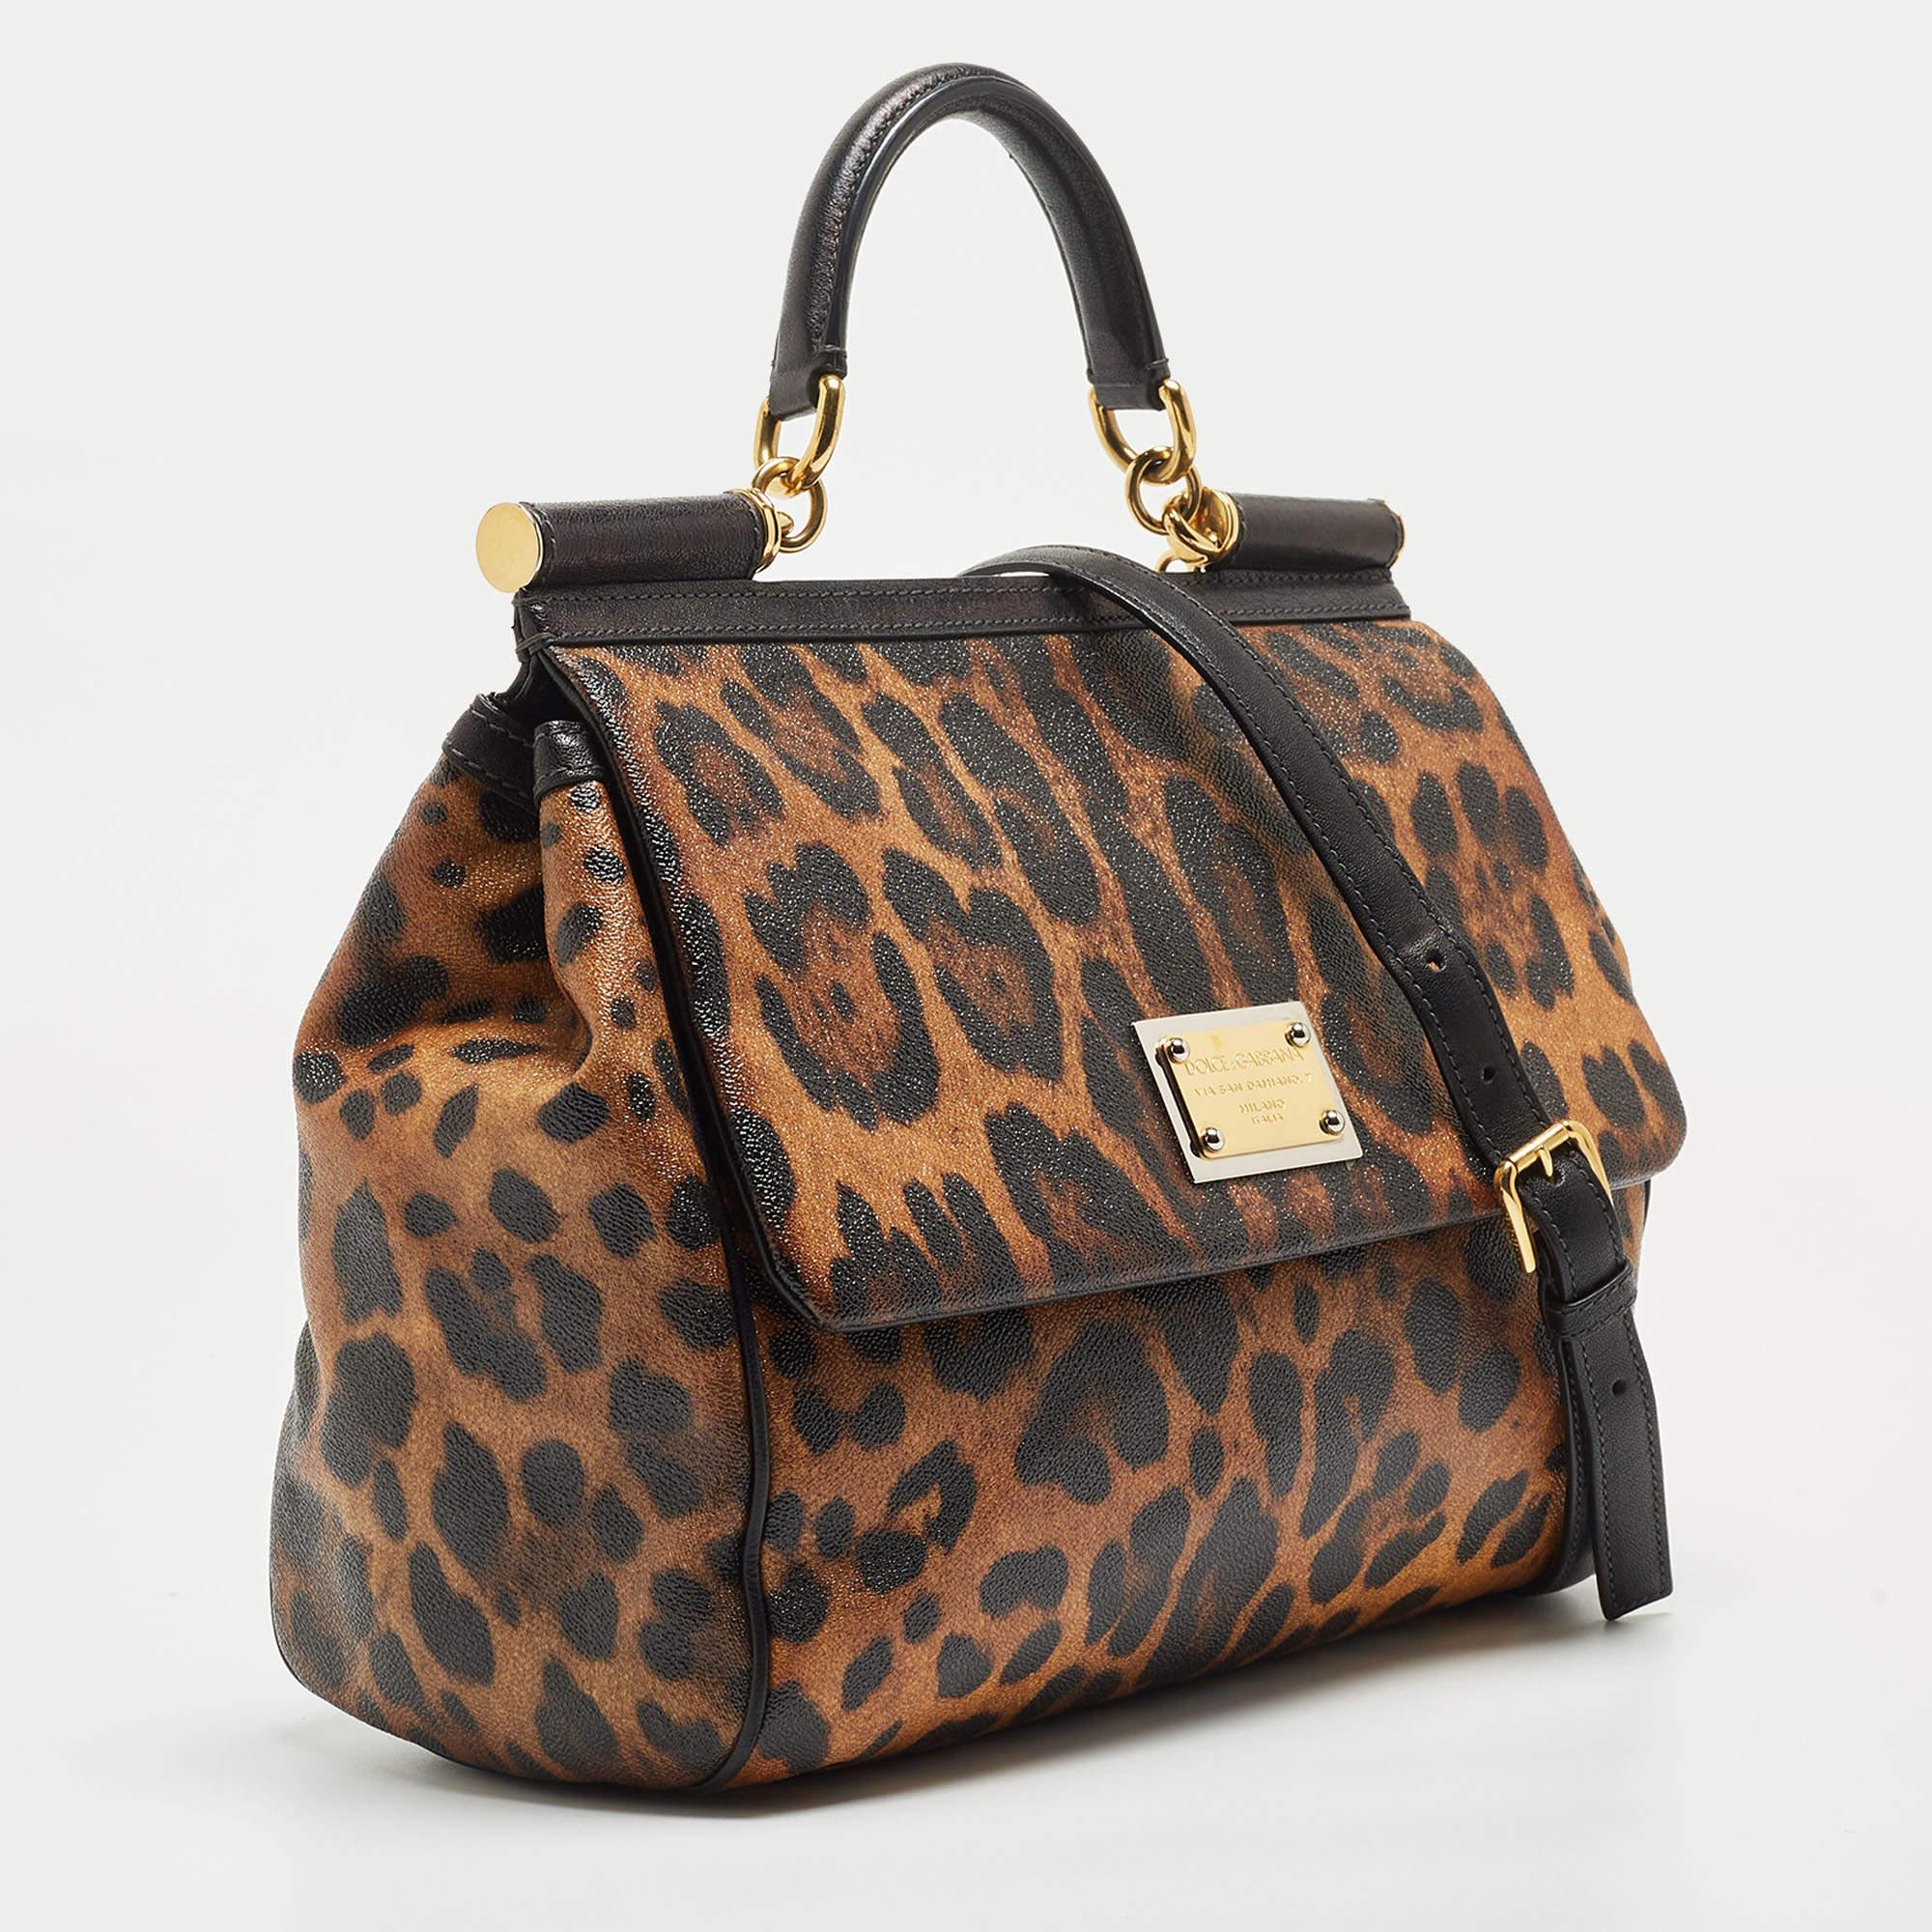 This Dolce & Gabbana handbag is an example of the brand's fine designs that are skillfully crafted to project a classic charm. The hobo is made of leopard-print canvas as well as leather and added with gold-tone hardware, a top handle, and a